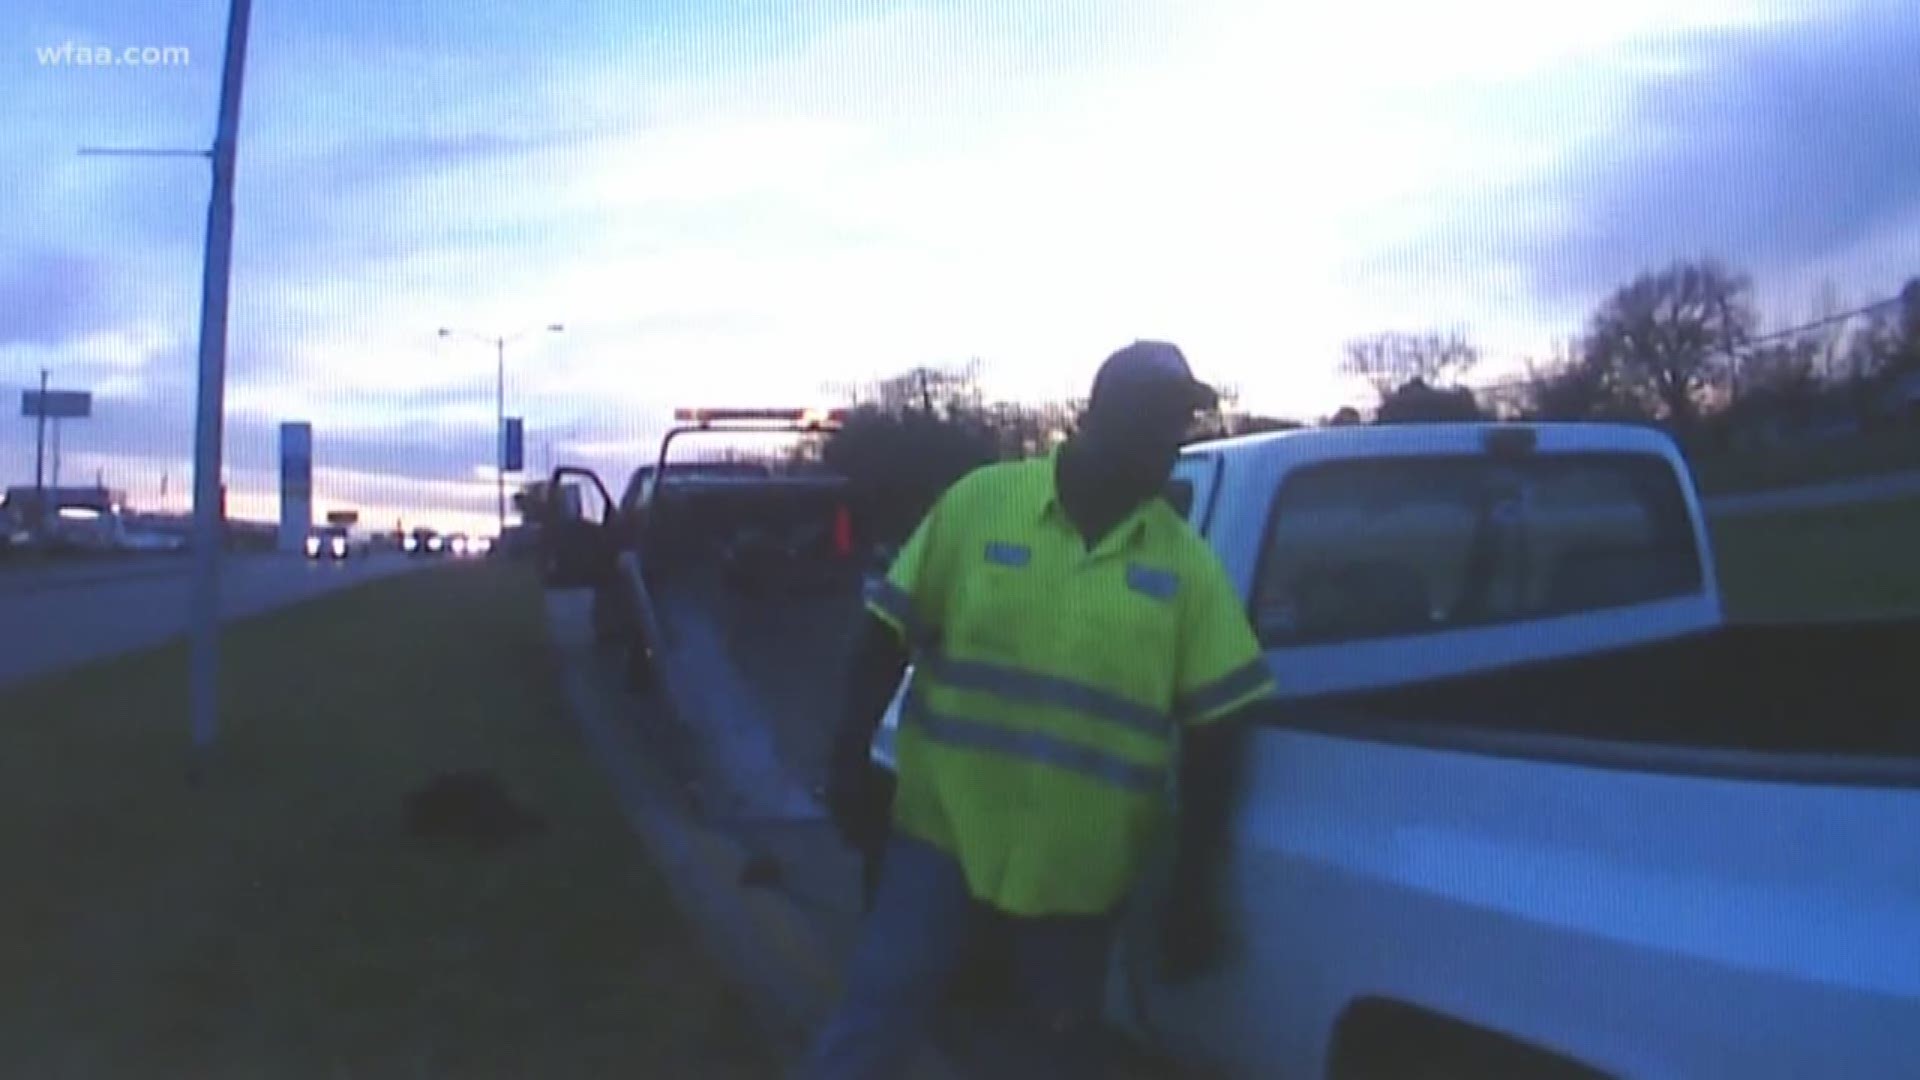 His truck broke down on Valentine's Day. Then a police officer stepped in to help.